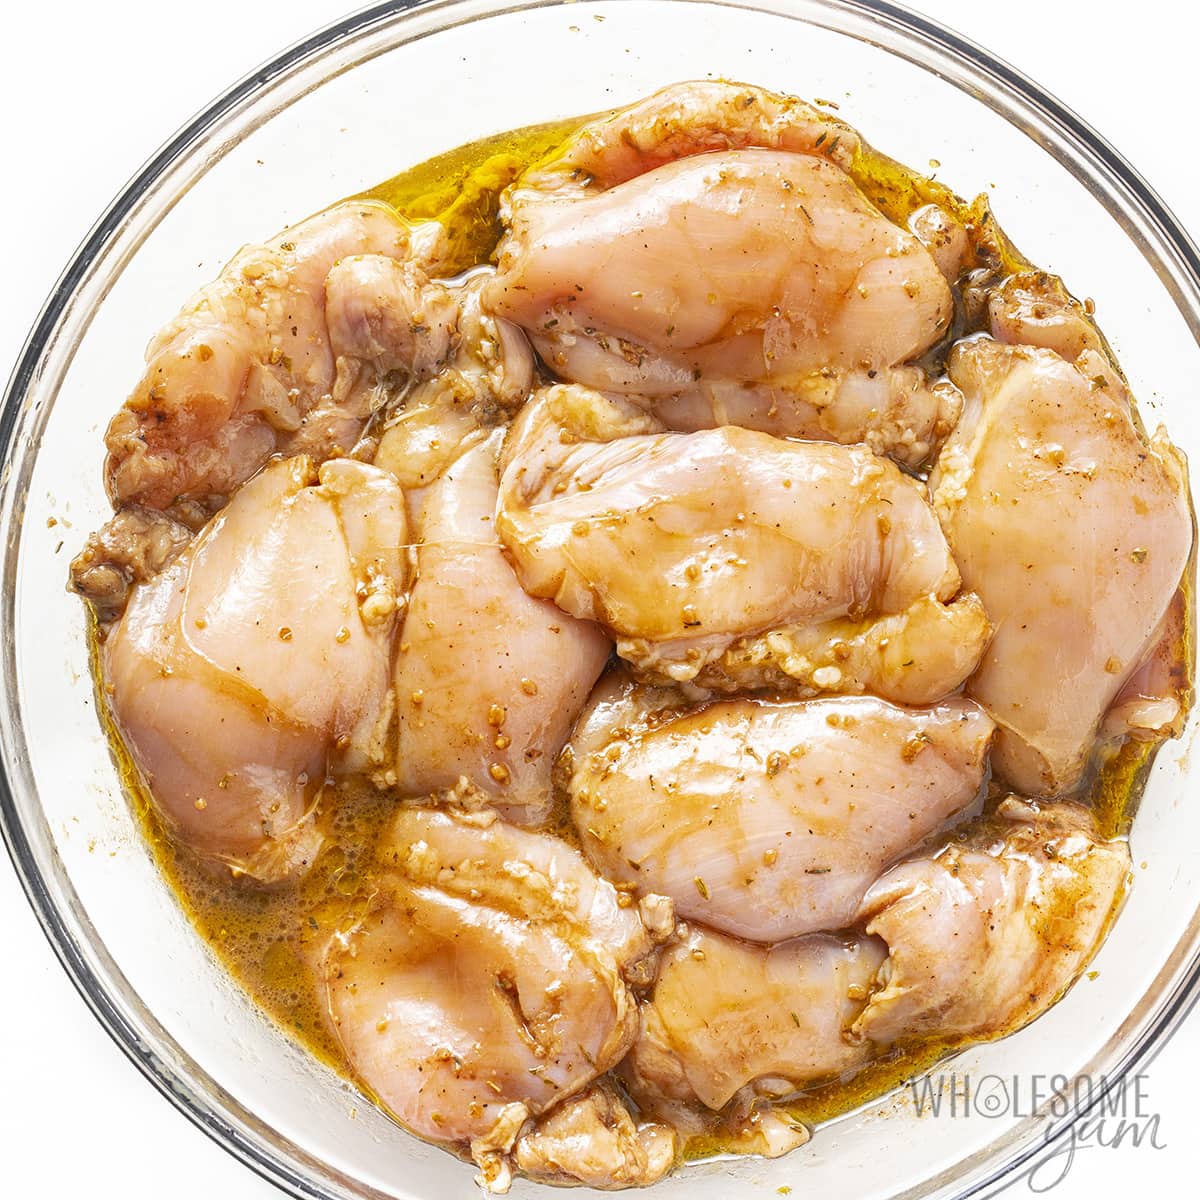 Balsamic chicken marinade with thighs.